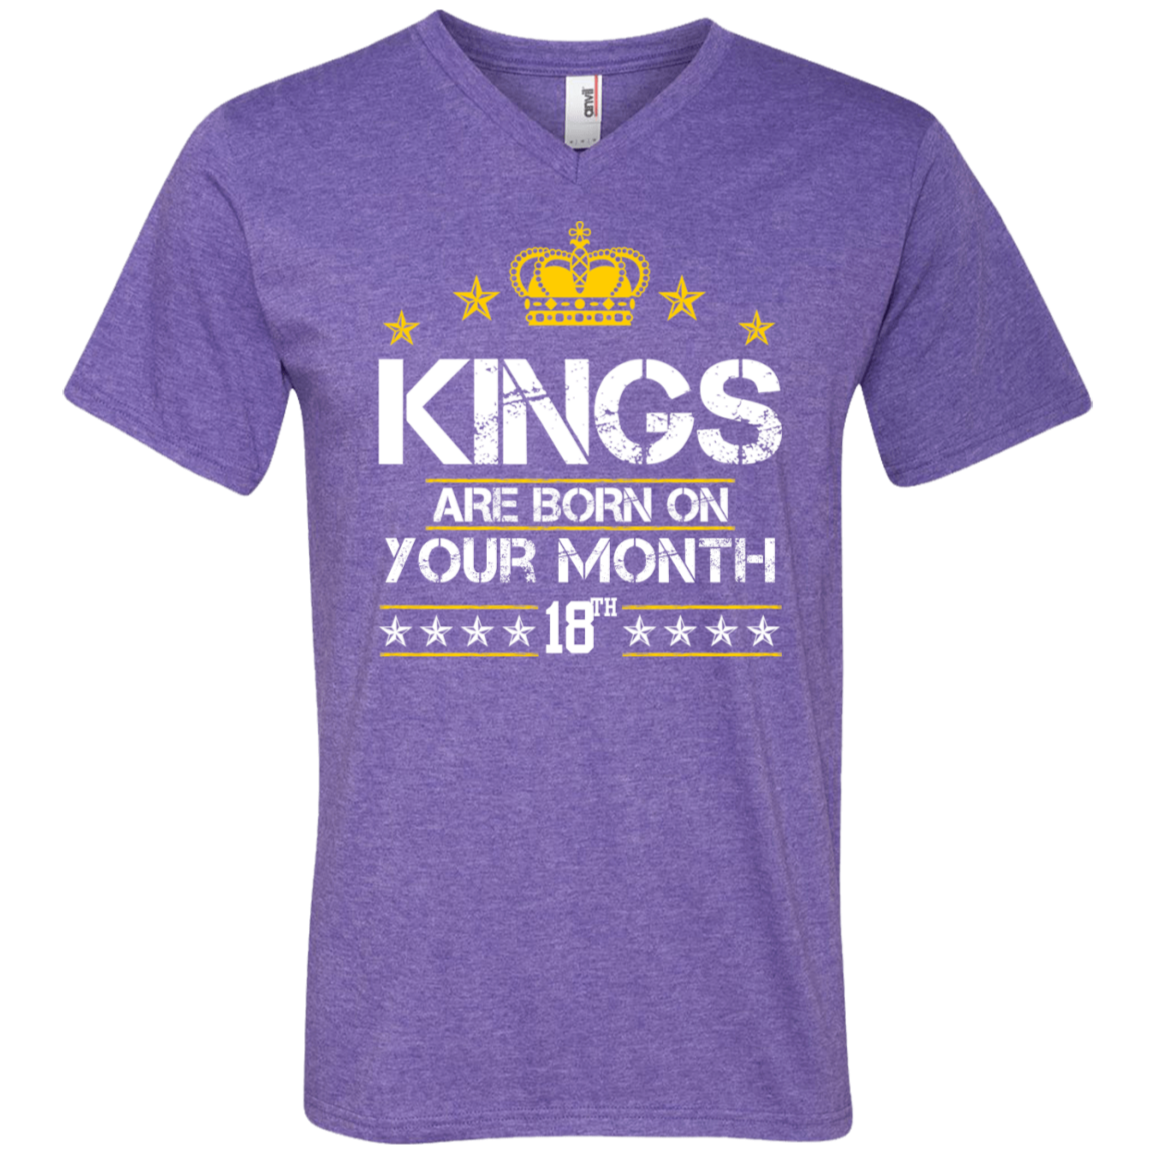 Men's V-Neck T-Shirt-Kings are Born On (your month/date) - JaZazzy 